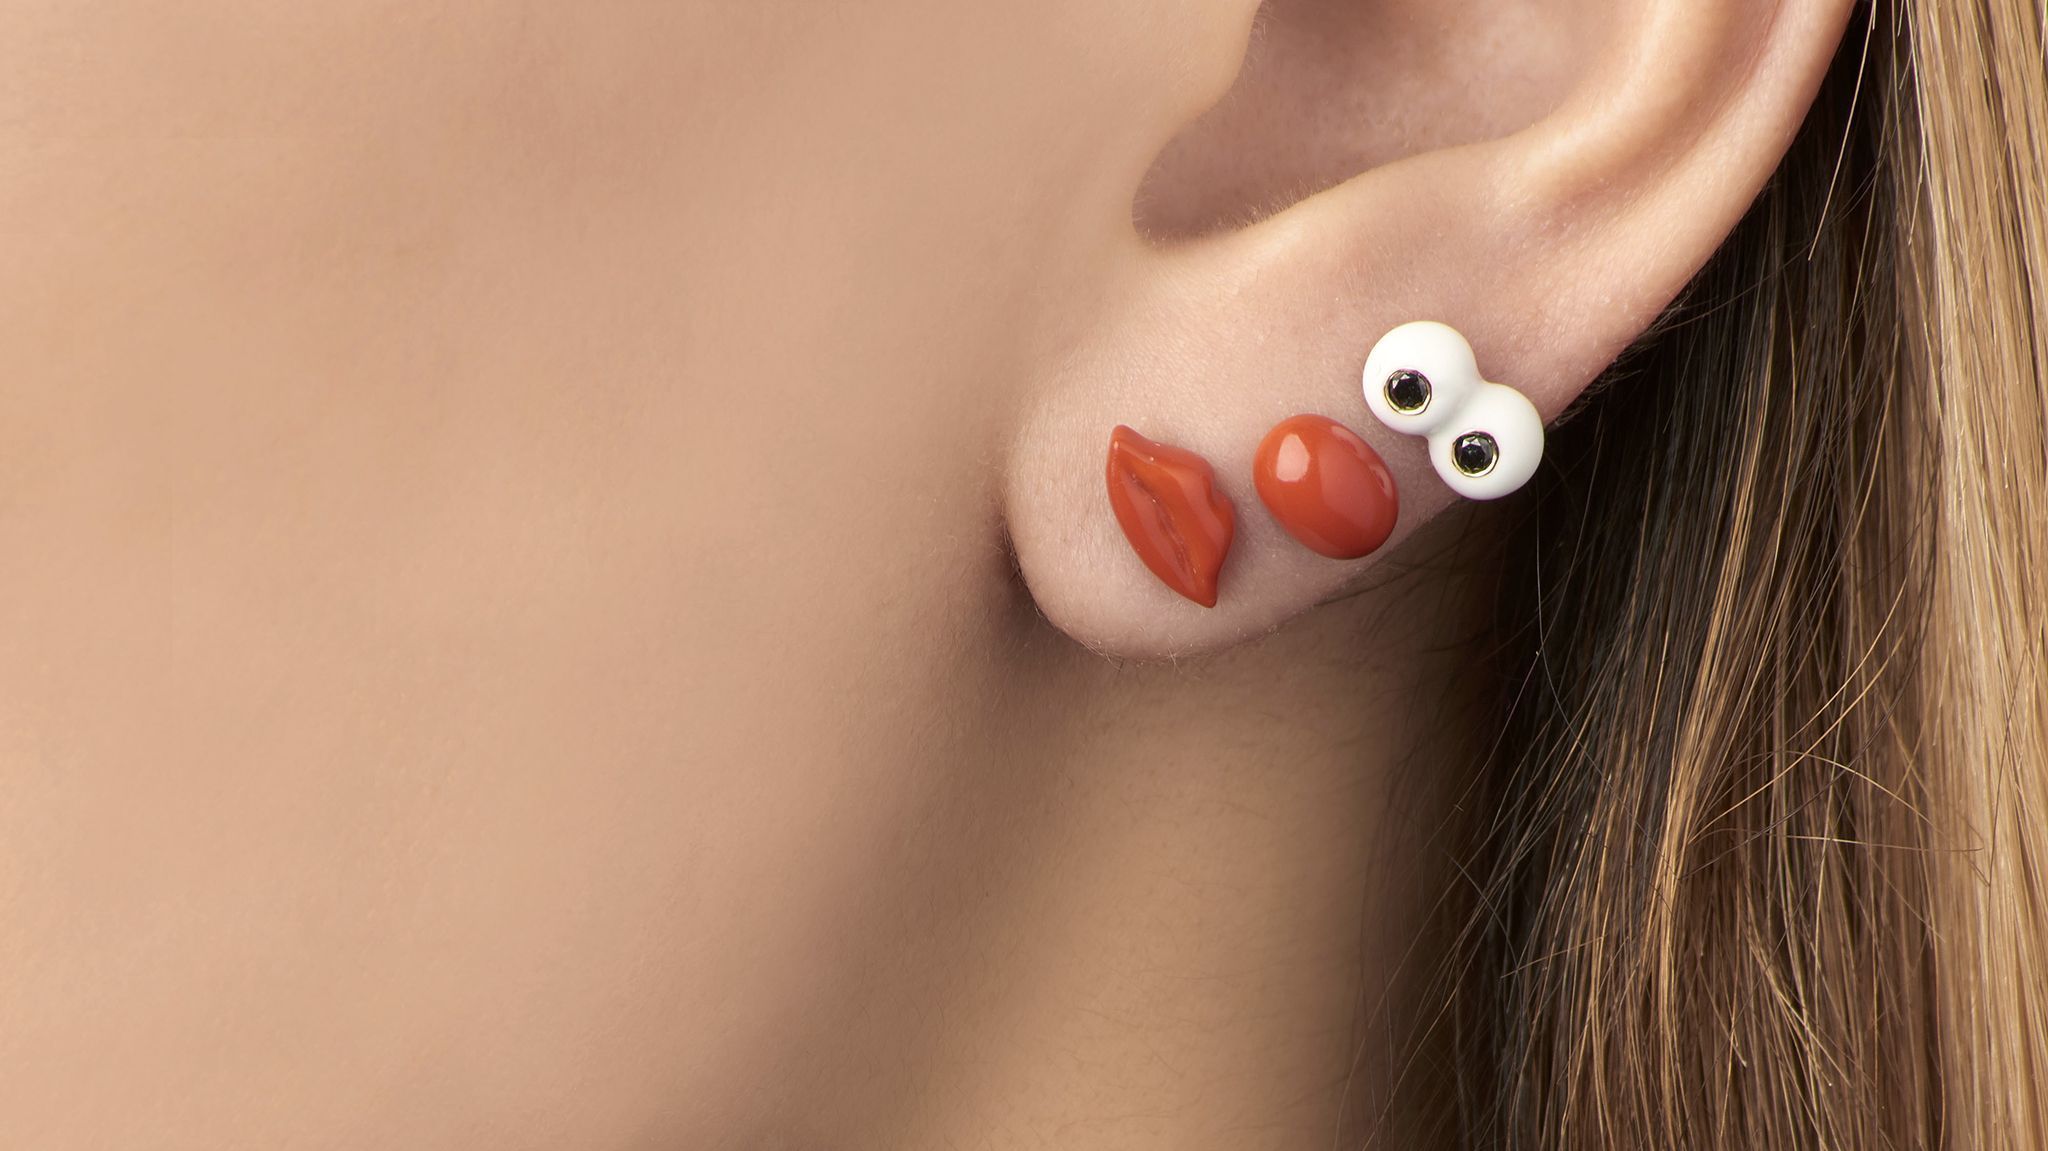 An earring ensemble by Alison Lou, designed for consumers with multiple piercings.